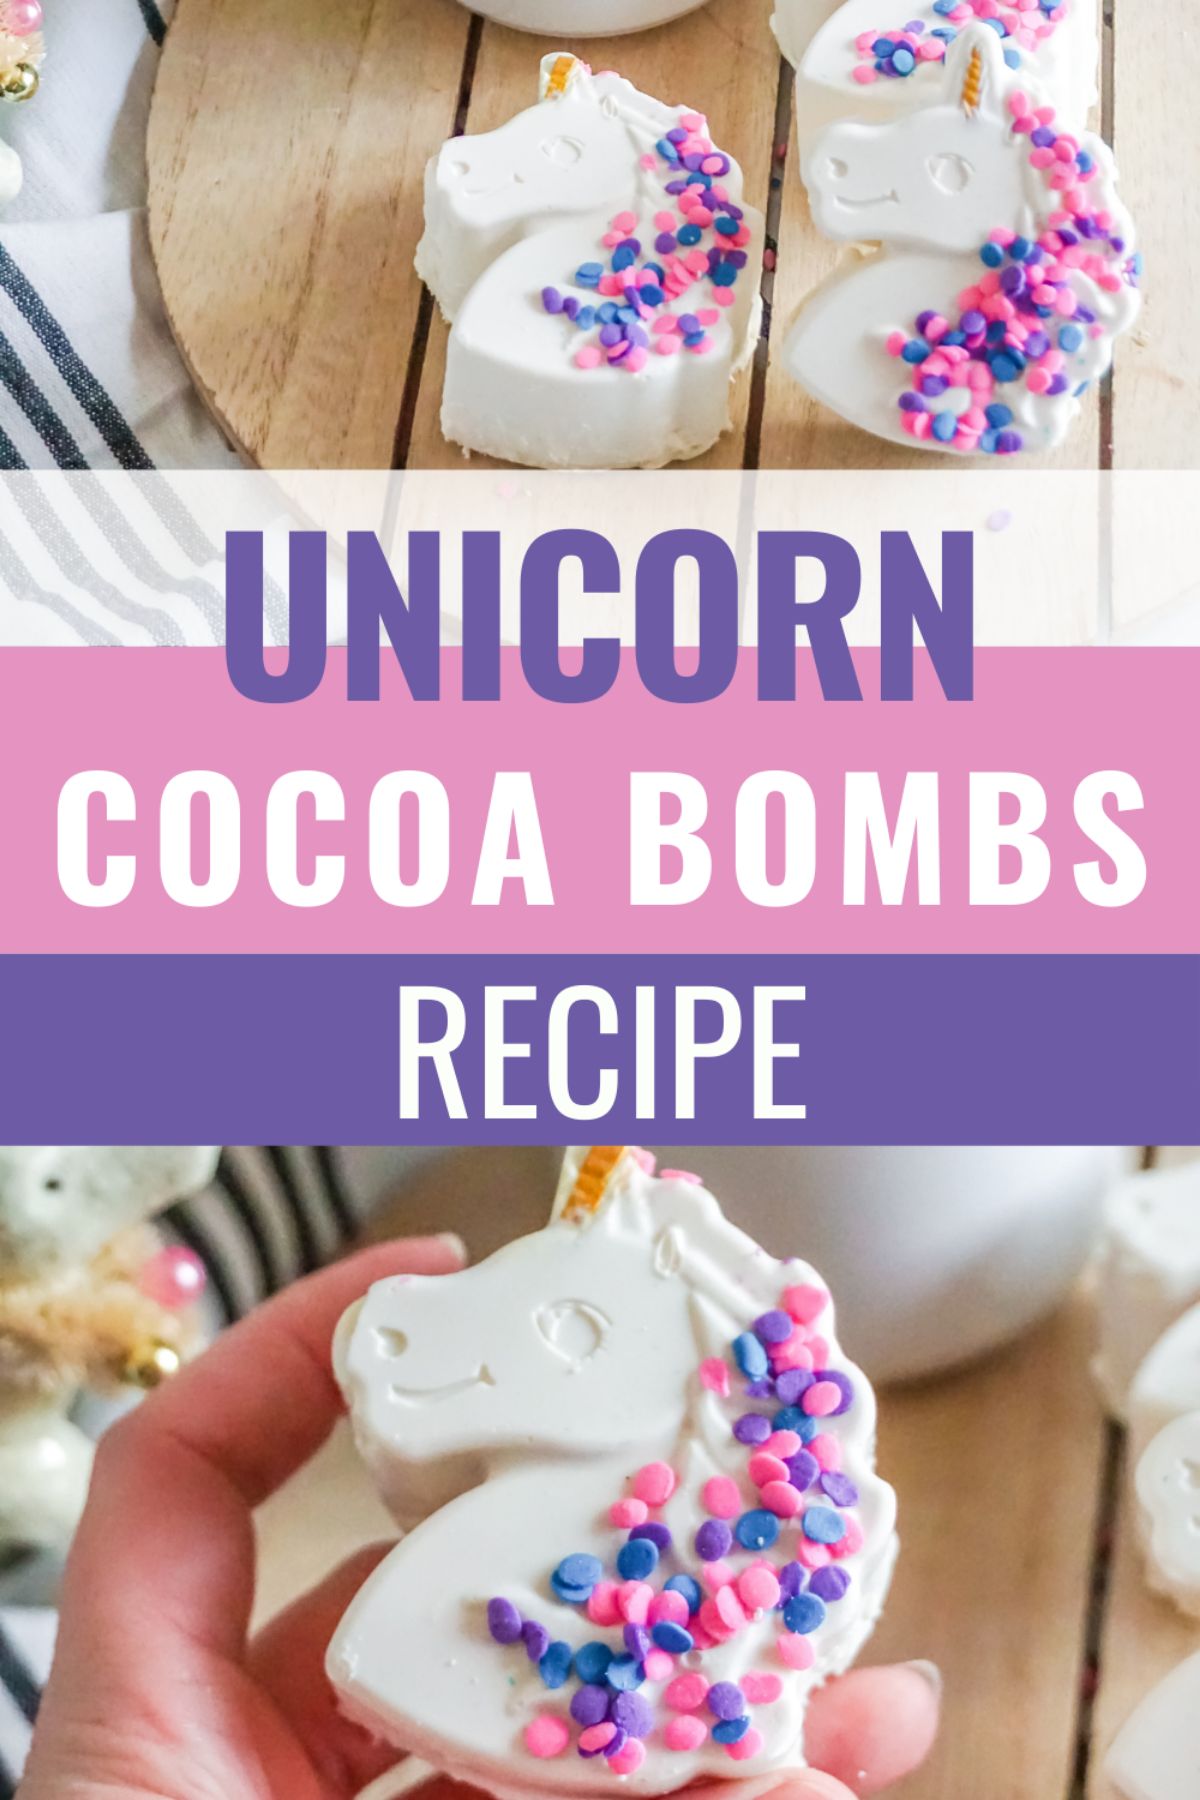 These Unicorn Hot Cocoa Bombs are perfect for those chilly winter nights. Not only do these taste delicious but they look awesome too! #hotcocoabombs #cocoabombs #hotcocoa #unicorn #recipe via @wondermomwannab